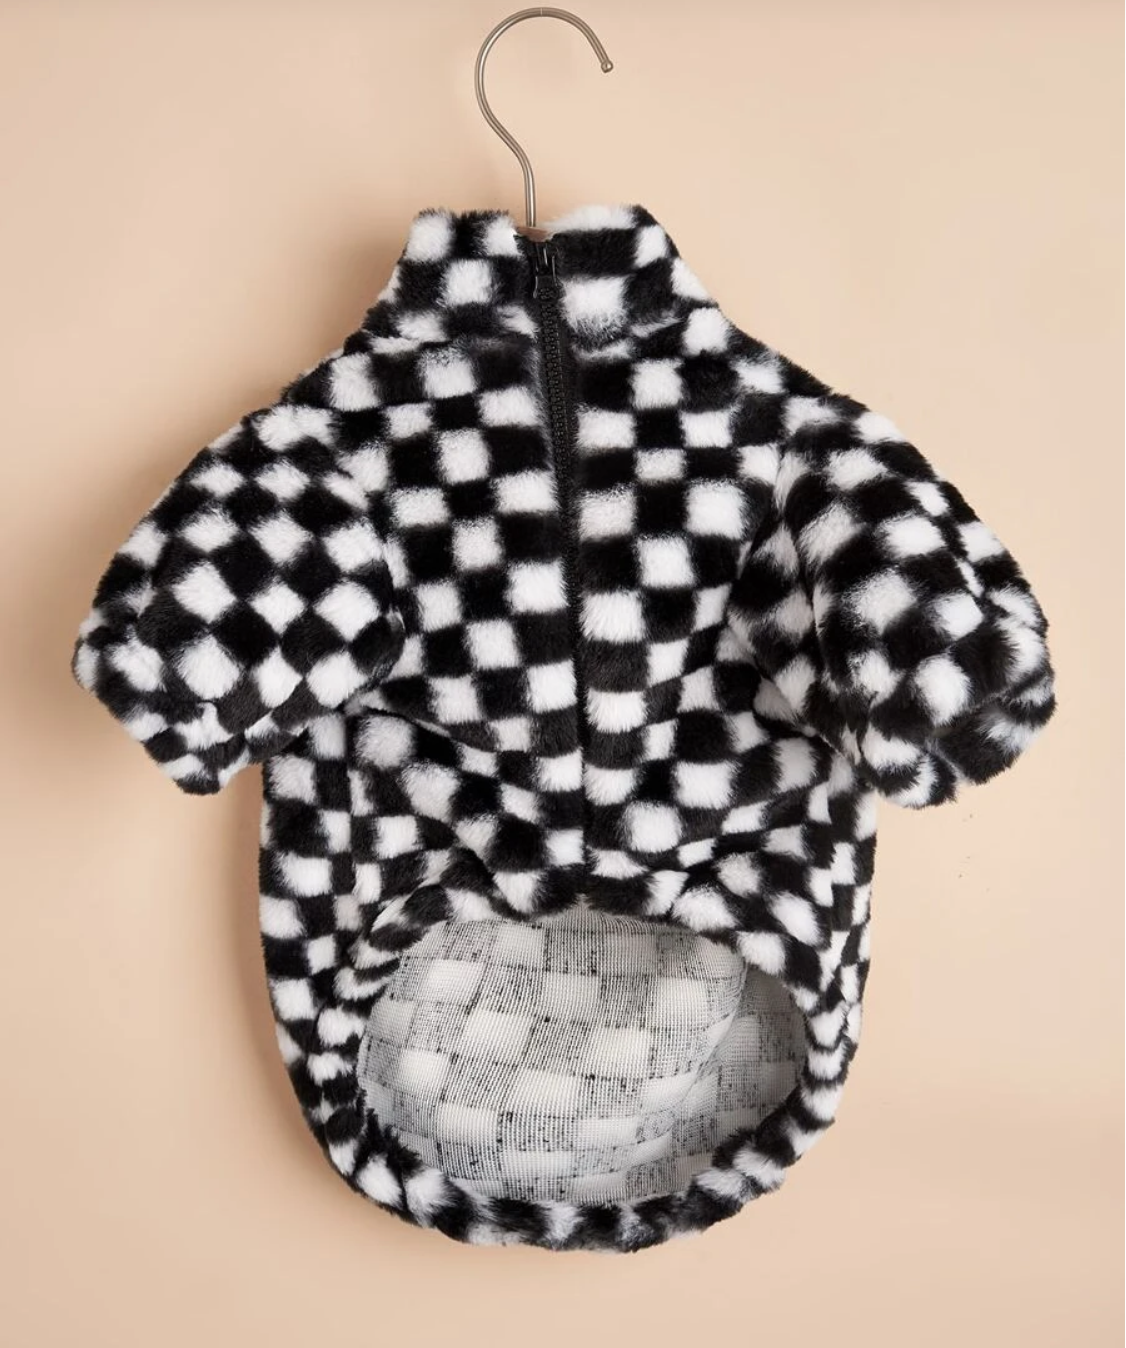 Black and White Check Pet Fleece Sweatshirt for Dogs and Cats